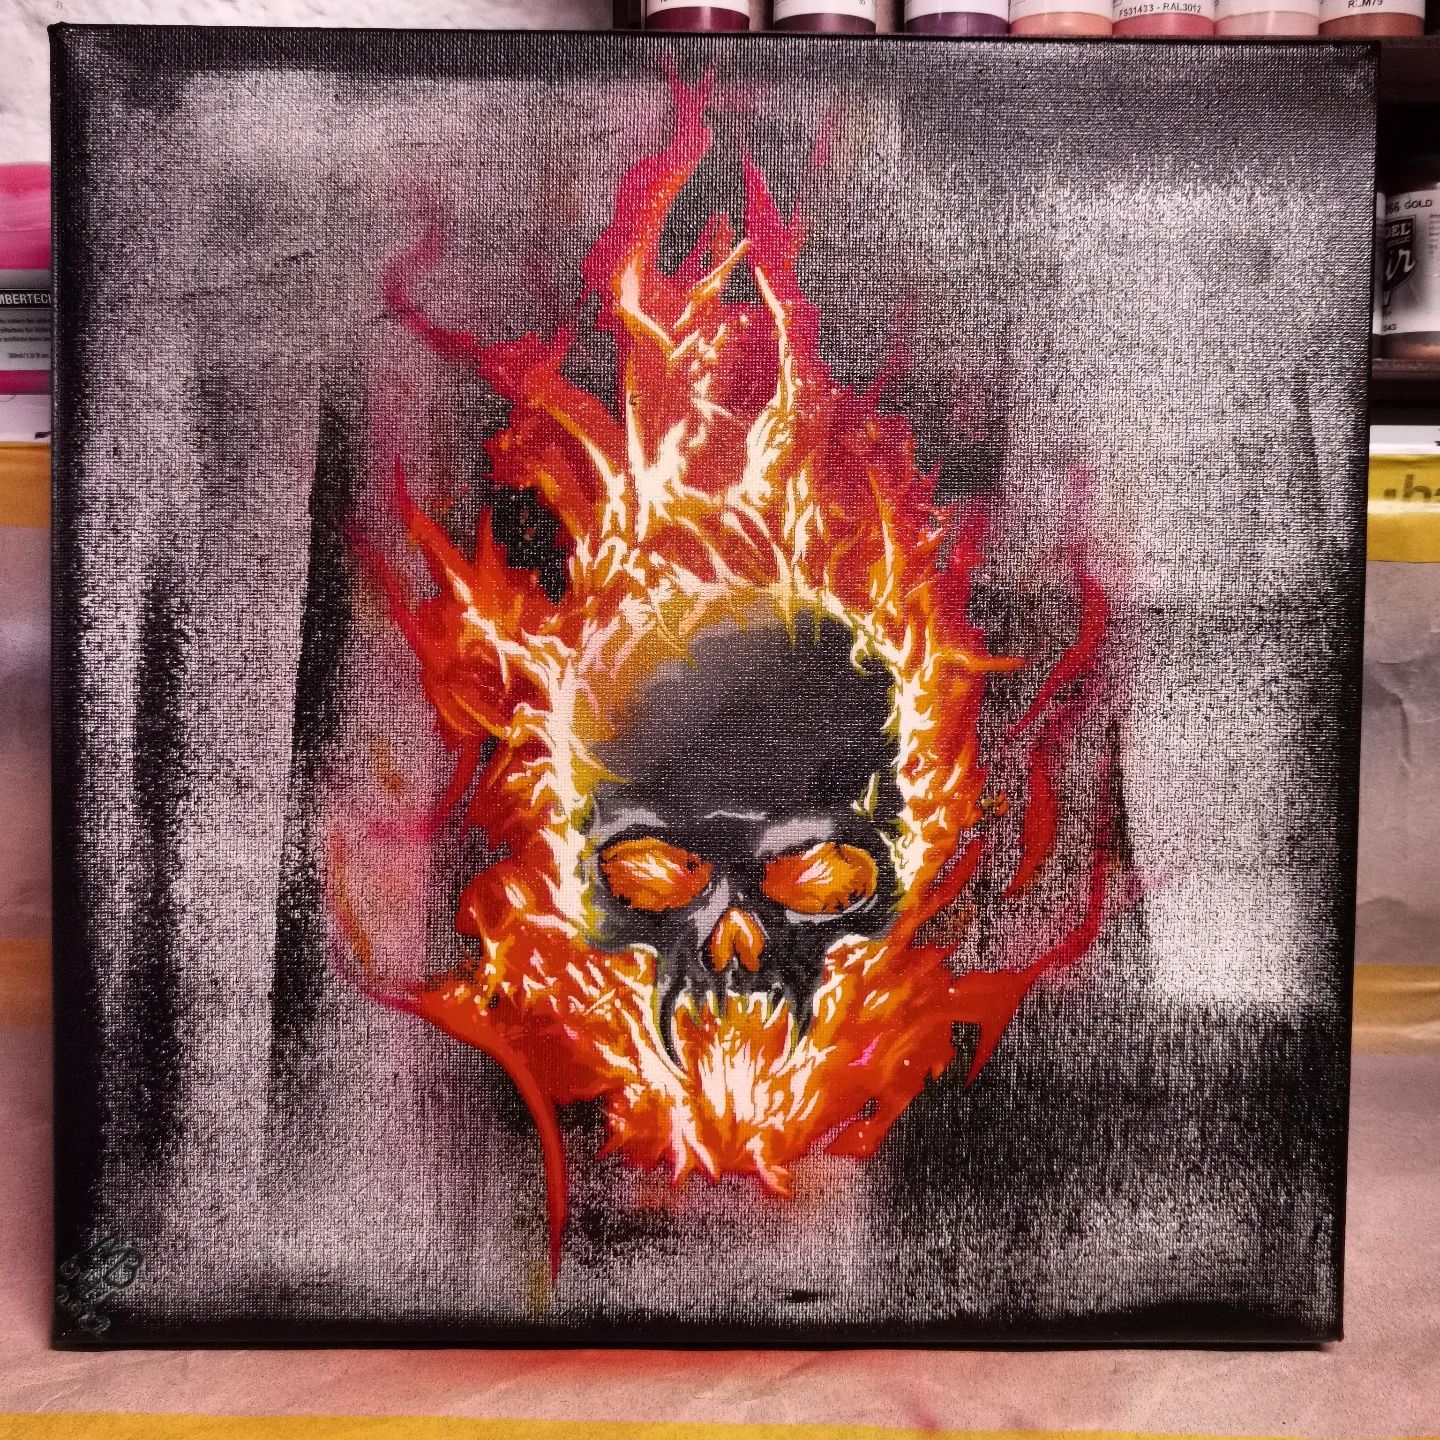 Skull in flames. Stepbystep stencil by  umr-design. Tried to play with the flames and the  background.  #airbrush #airbrushart #airbrushing #vallejo #theshifters #art #kunst #diy #creative #mystic #skull #flames #fire #grunge #feuer #flammen #totenschädel #schädel #horror #horrorart #umrdesign #stencil #stepbystep